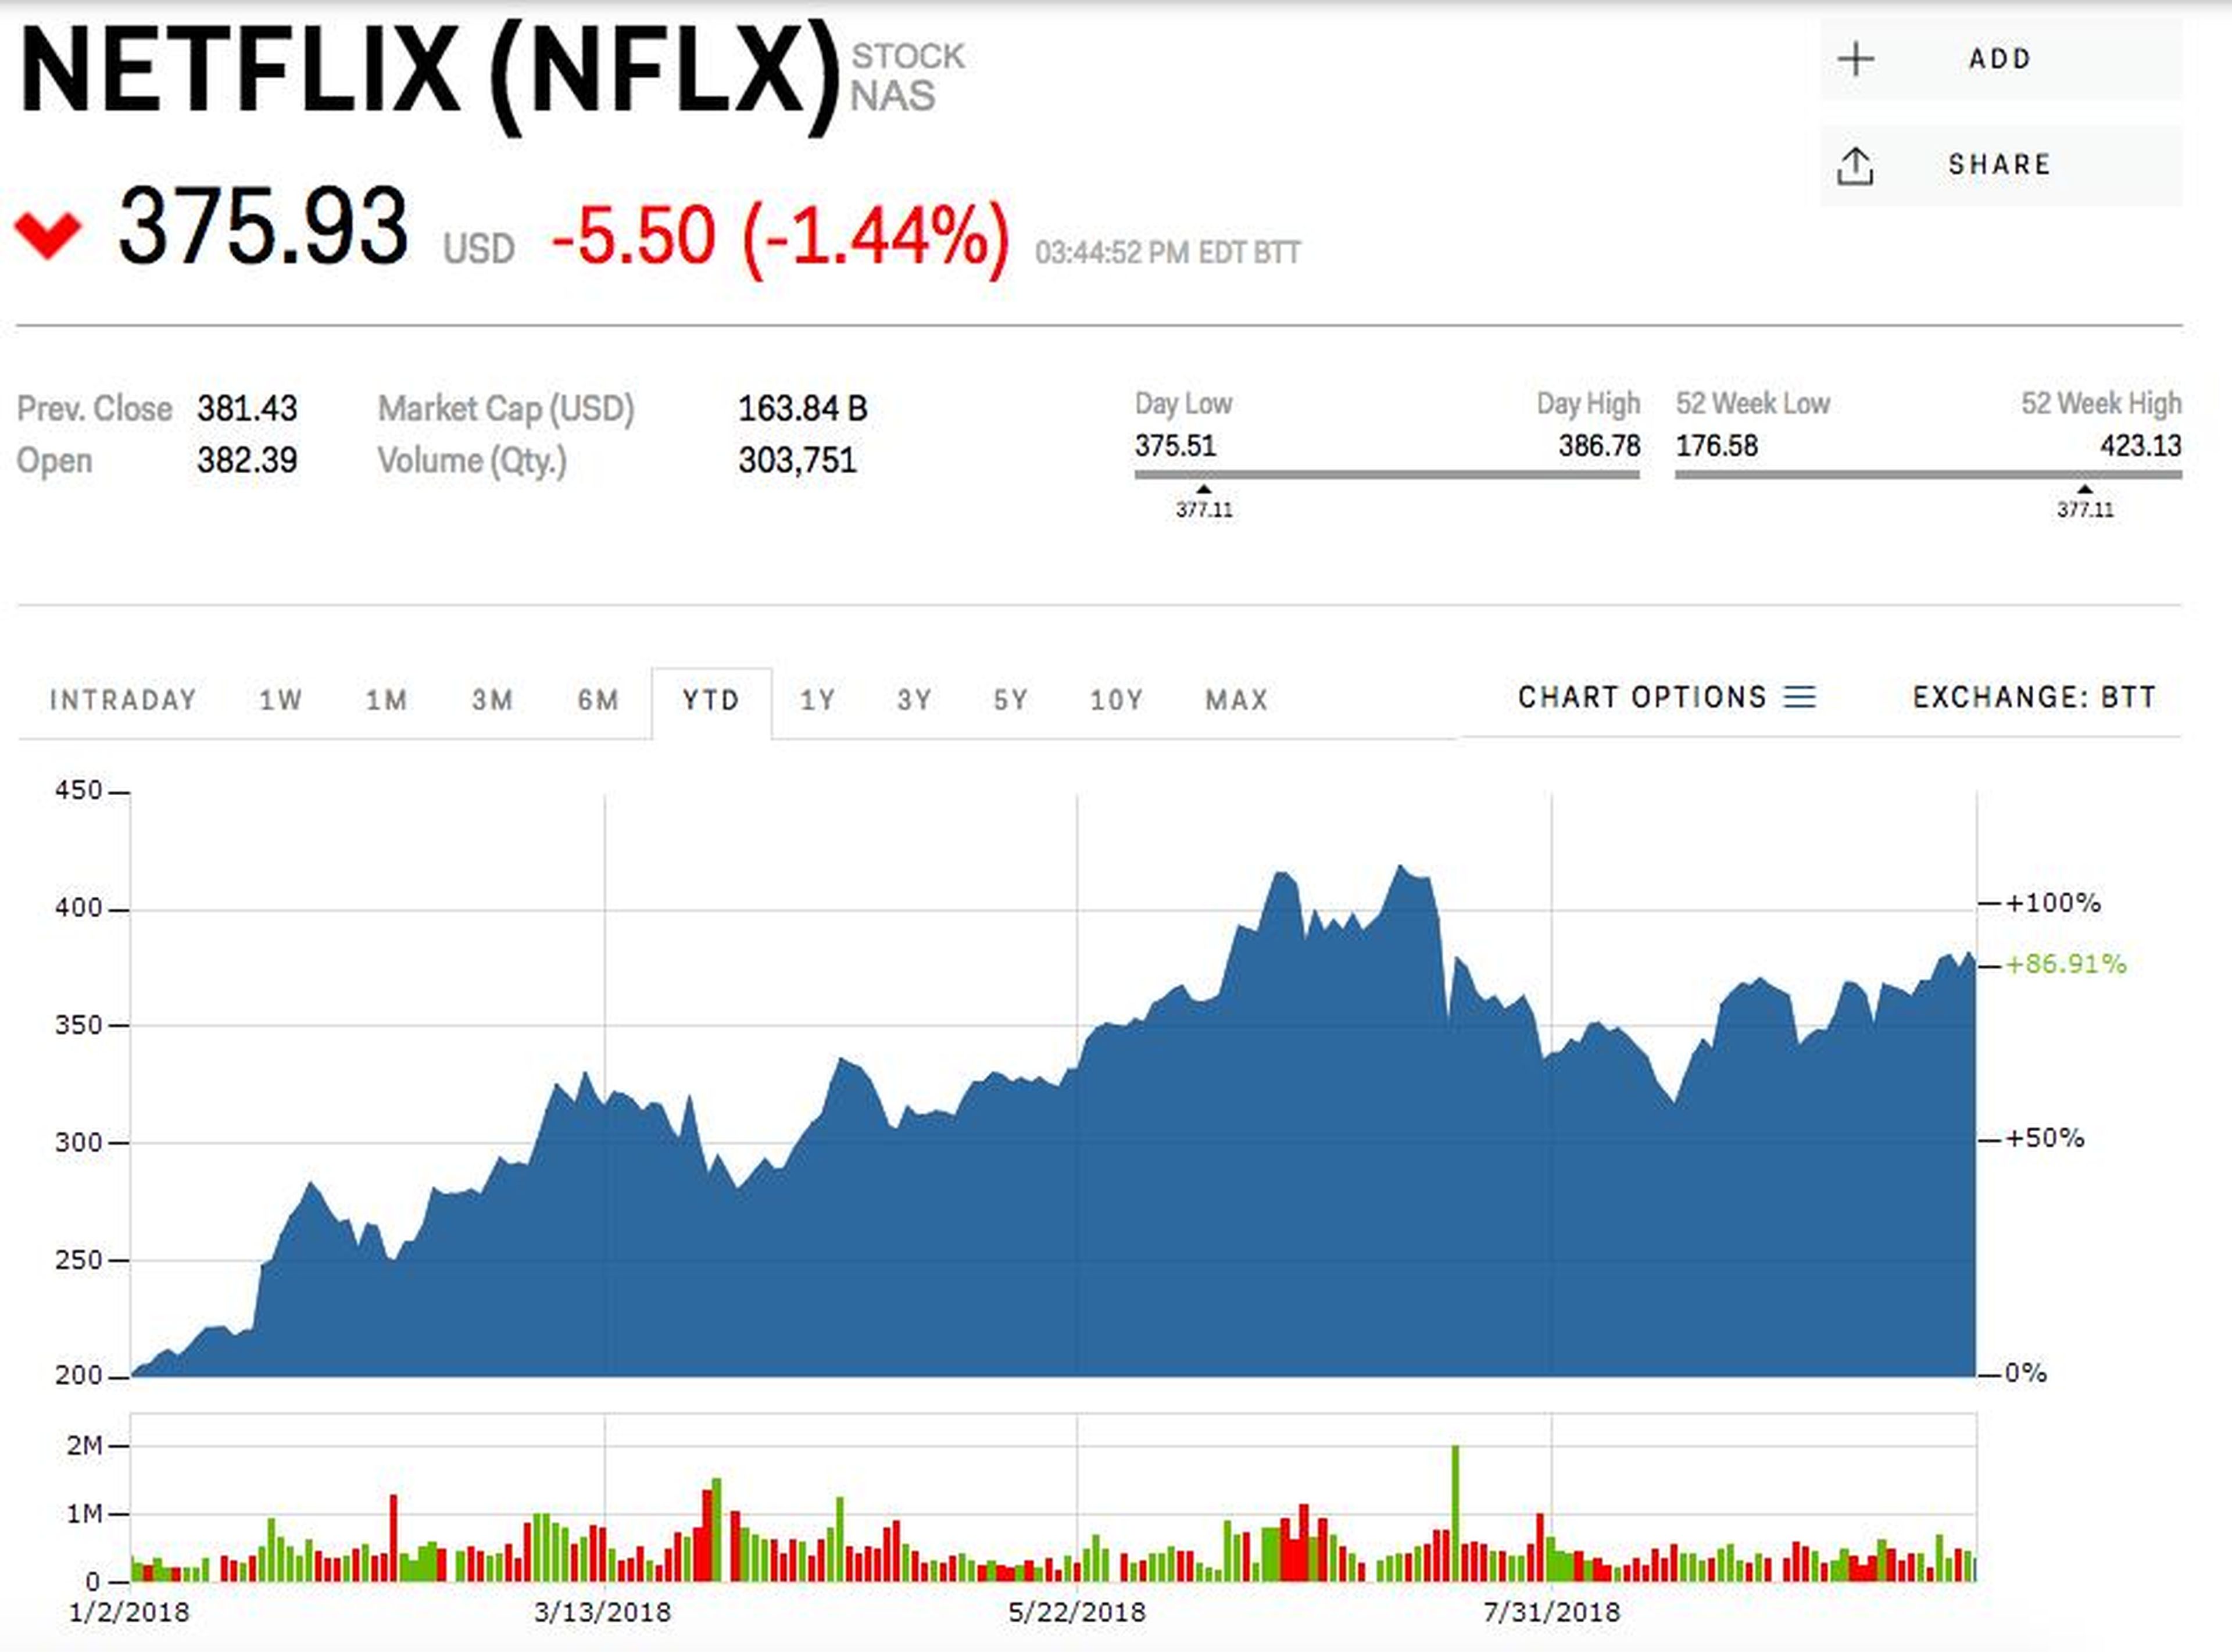 GOLDMAN SACHS: Here's what Wall Street is getting wrong about Netflix